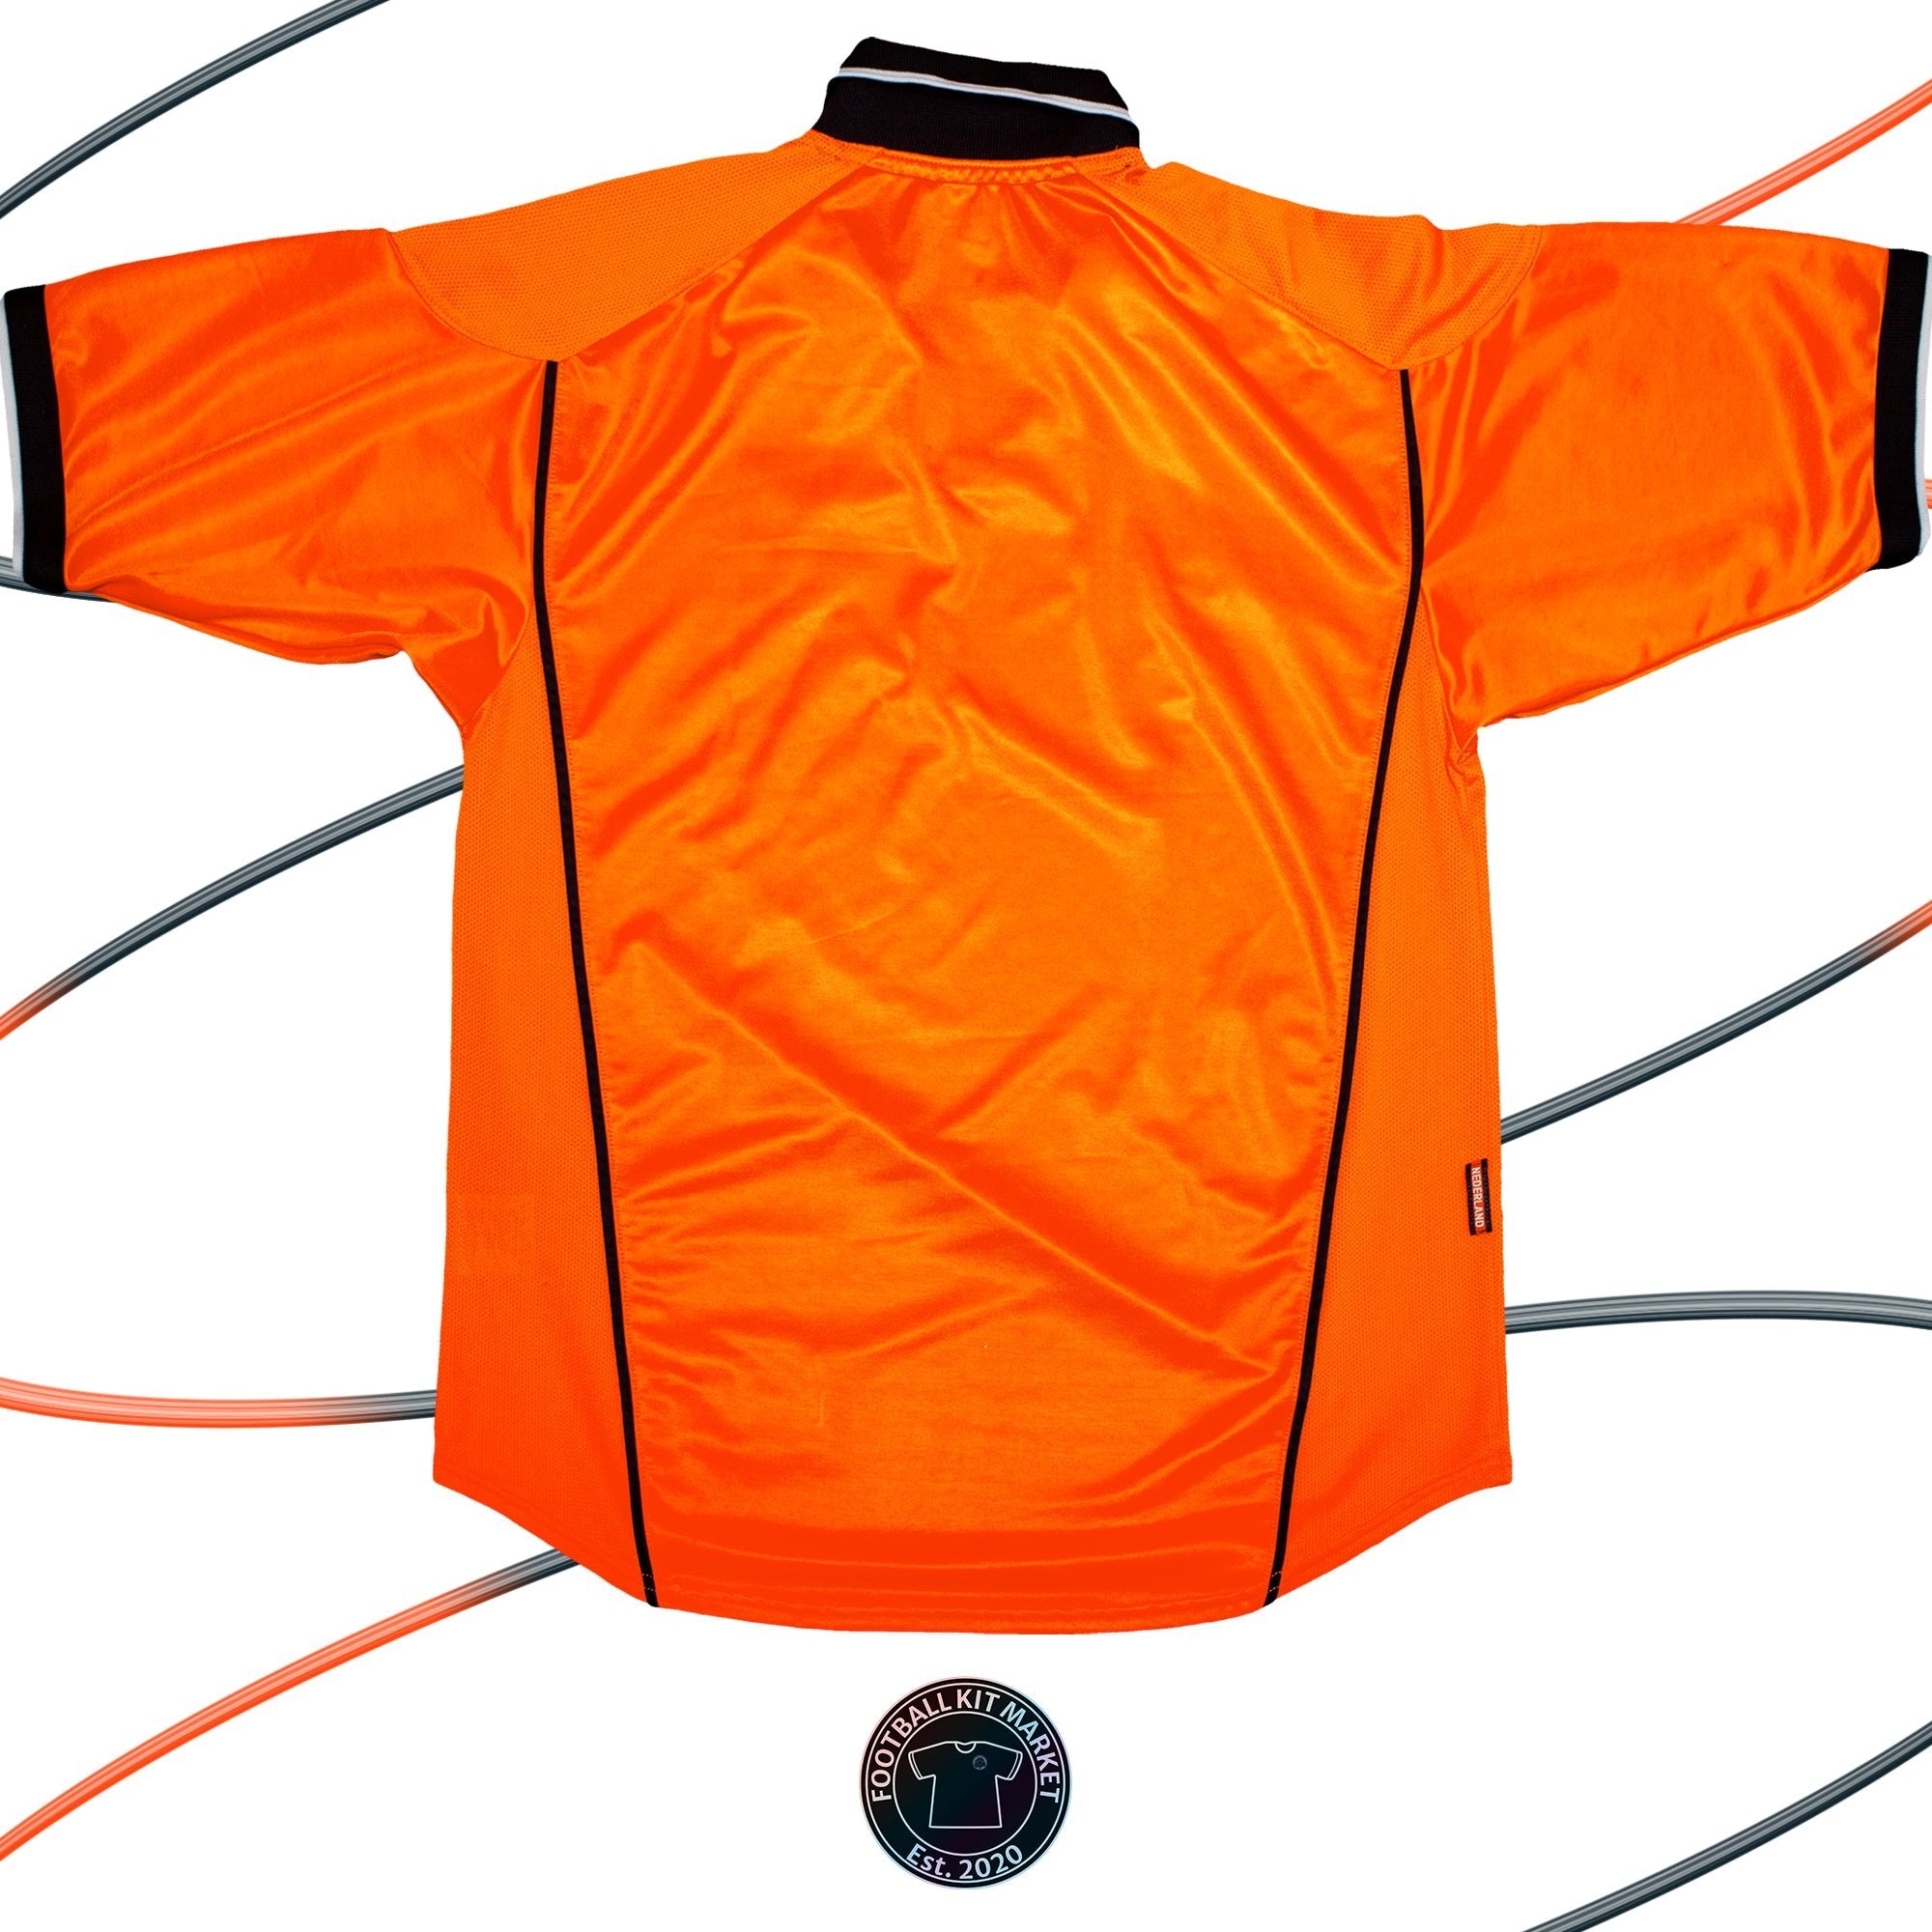 Genuine NETHERLANDS Home (1998-2000) - NIKE (L) - Product Image from Football Kit Market